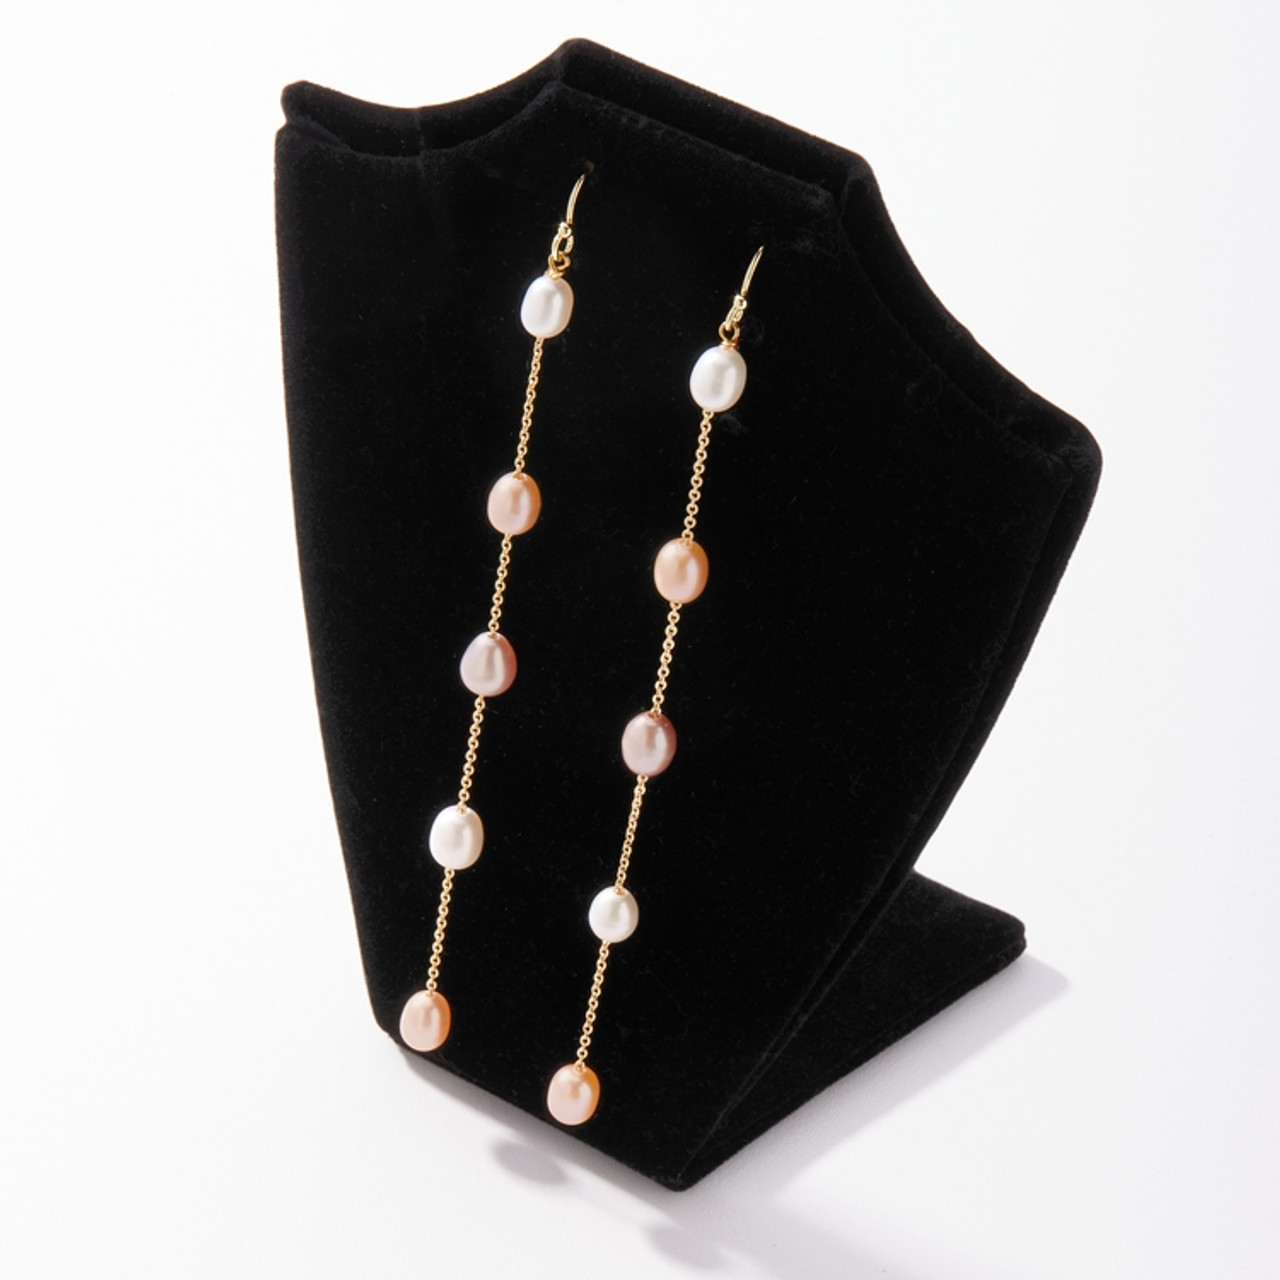 Mariell Genuine Freshwater Pearl Shoulder Duster Dangle Earrings - Champagne Multi on Gold Chain 4673E-CHM-G